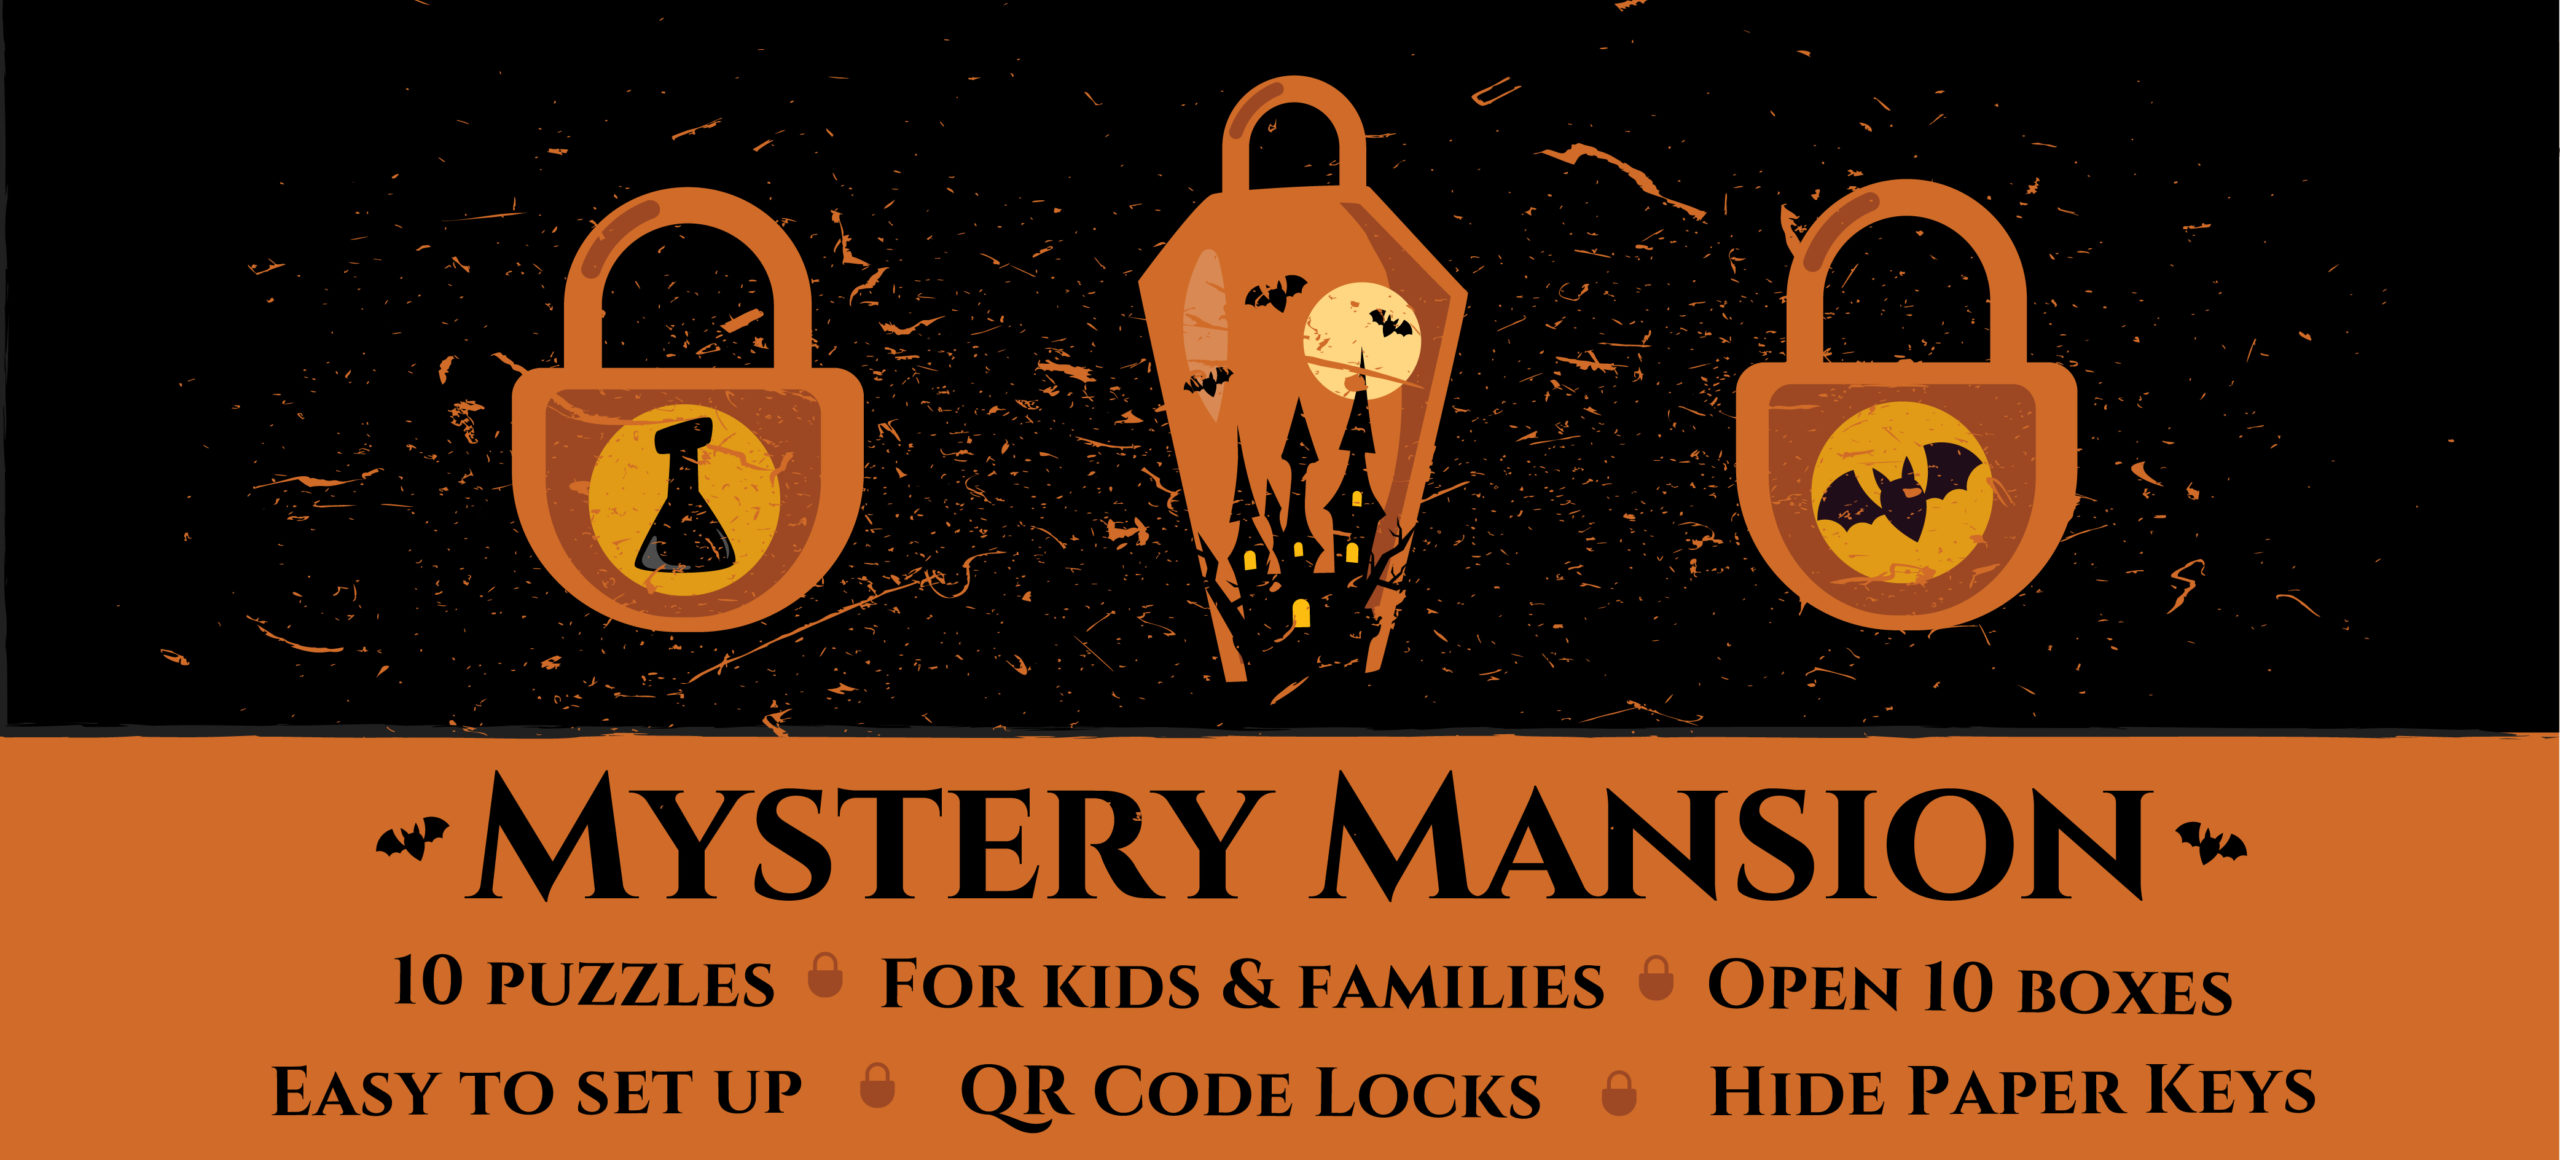 Mystery Mansion - Escape Room for Kids